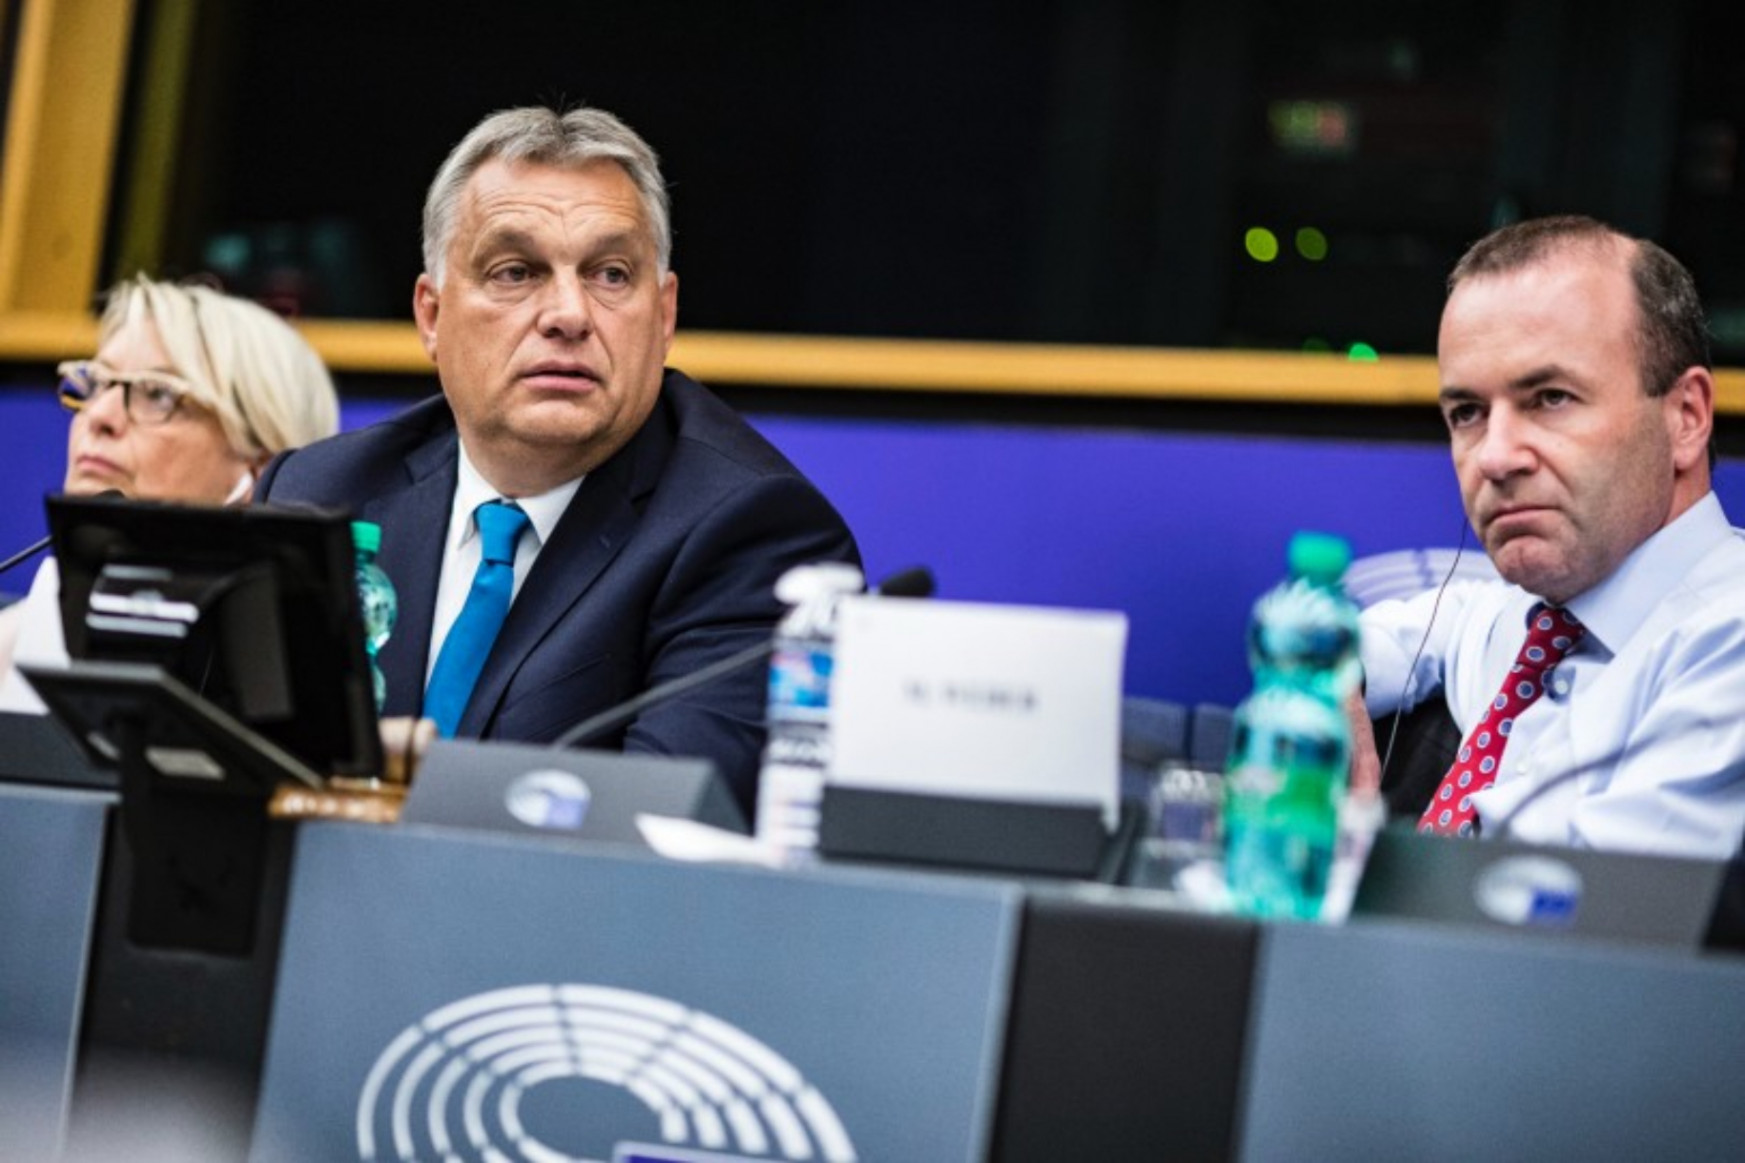 Orbán suggests Fidesz should leave the EPP Group